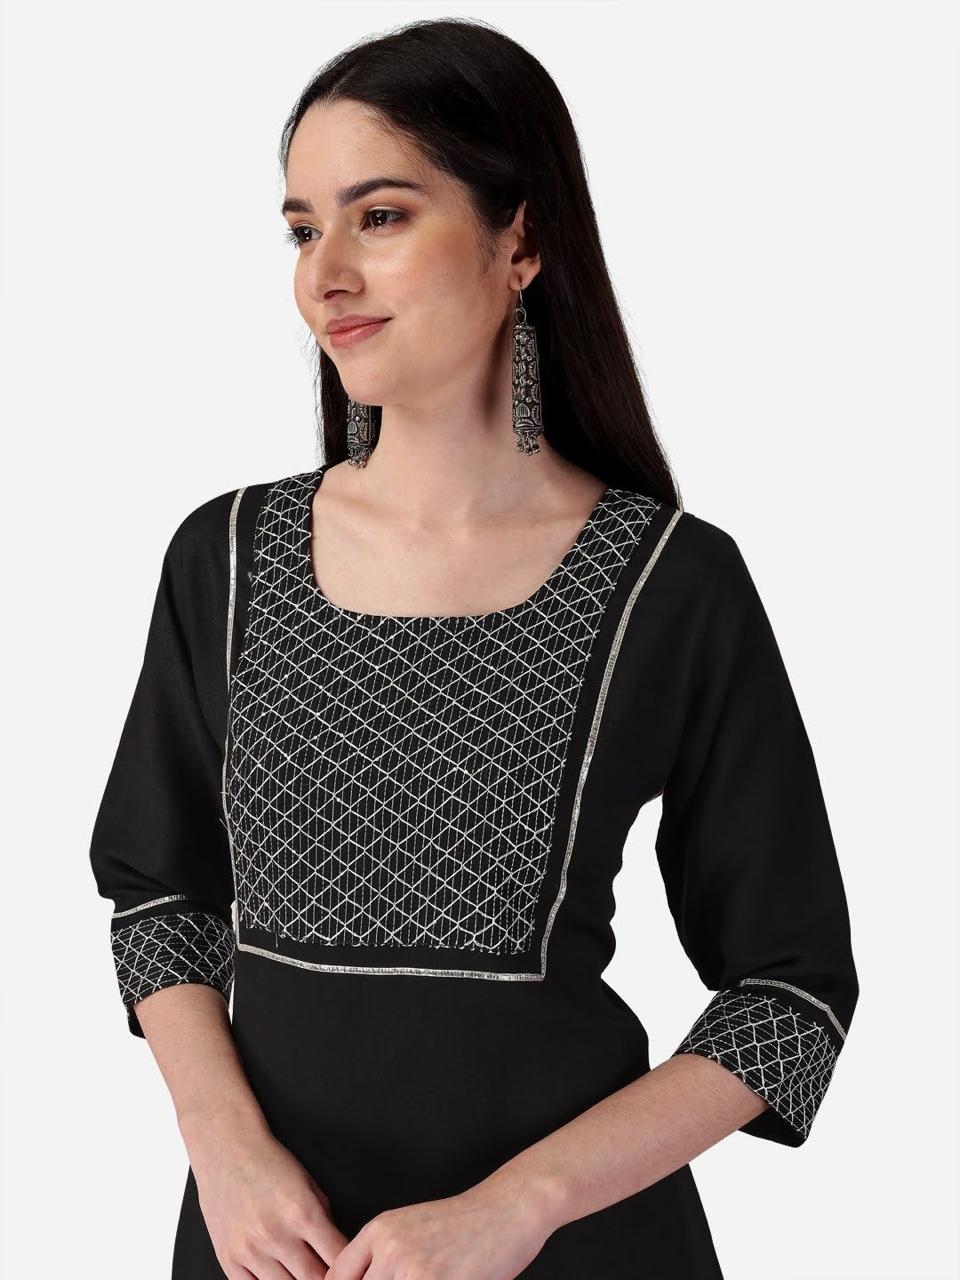 channel 9 sku 121 to 125 cotton elegant top with bottom size set